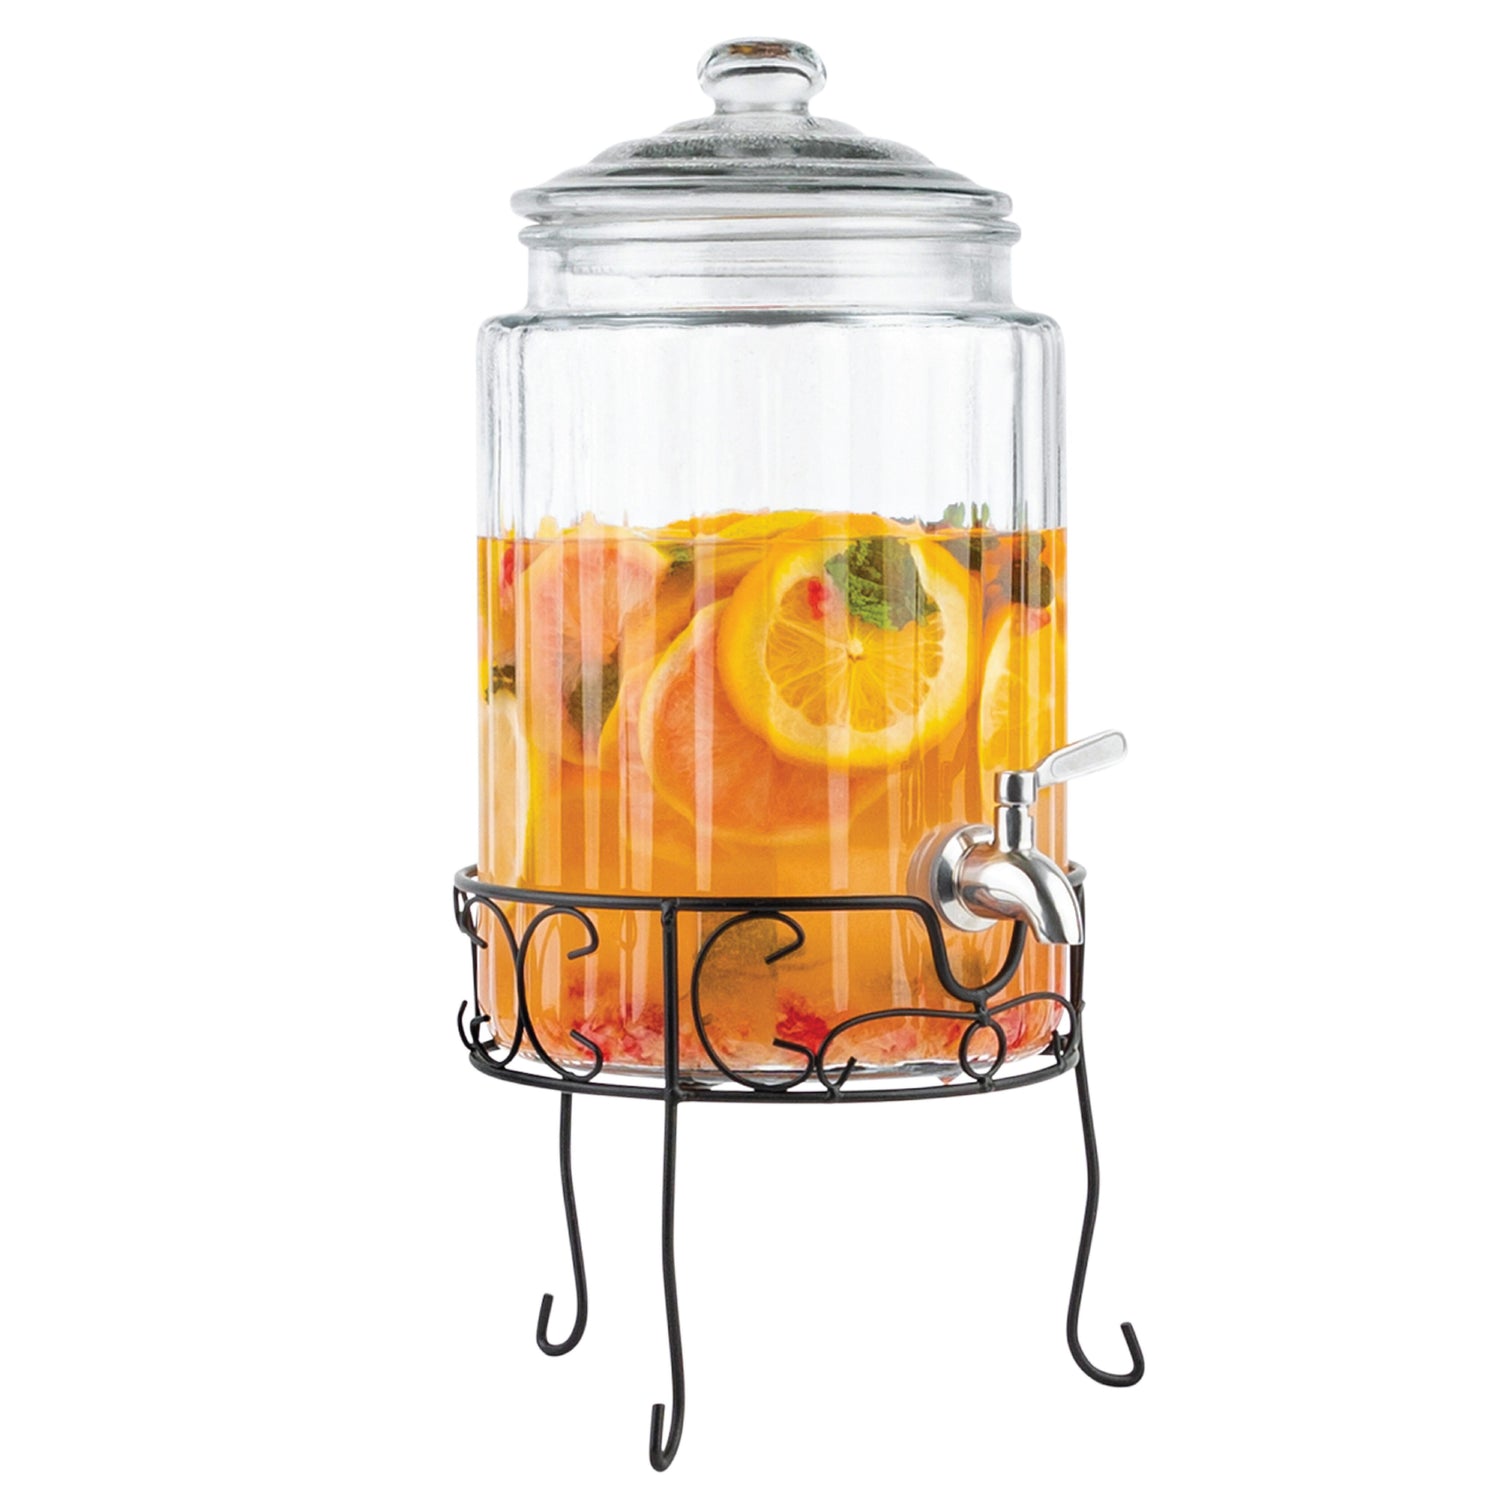 Quality Glass Twin Ice Cold Beverage Dispensers On Galvanized Stand /  Bucked 1.5 Gallon Each Jug